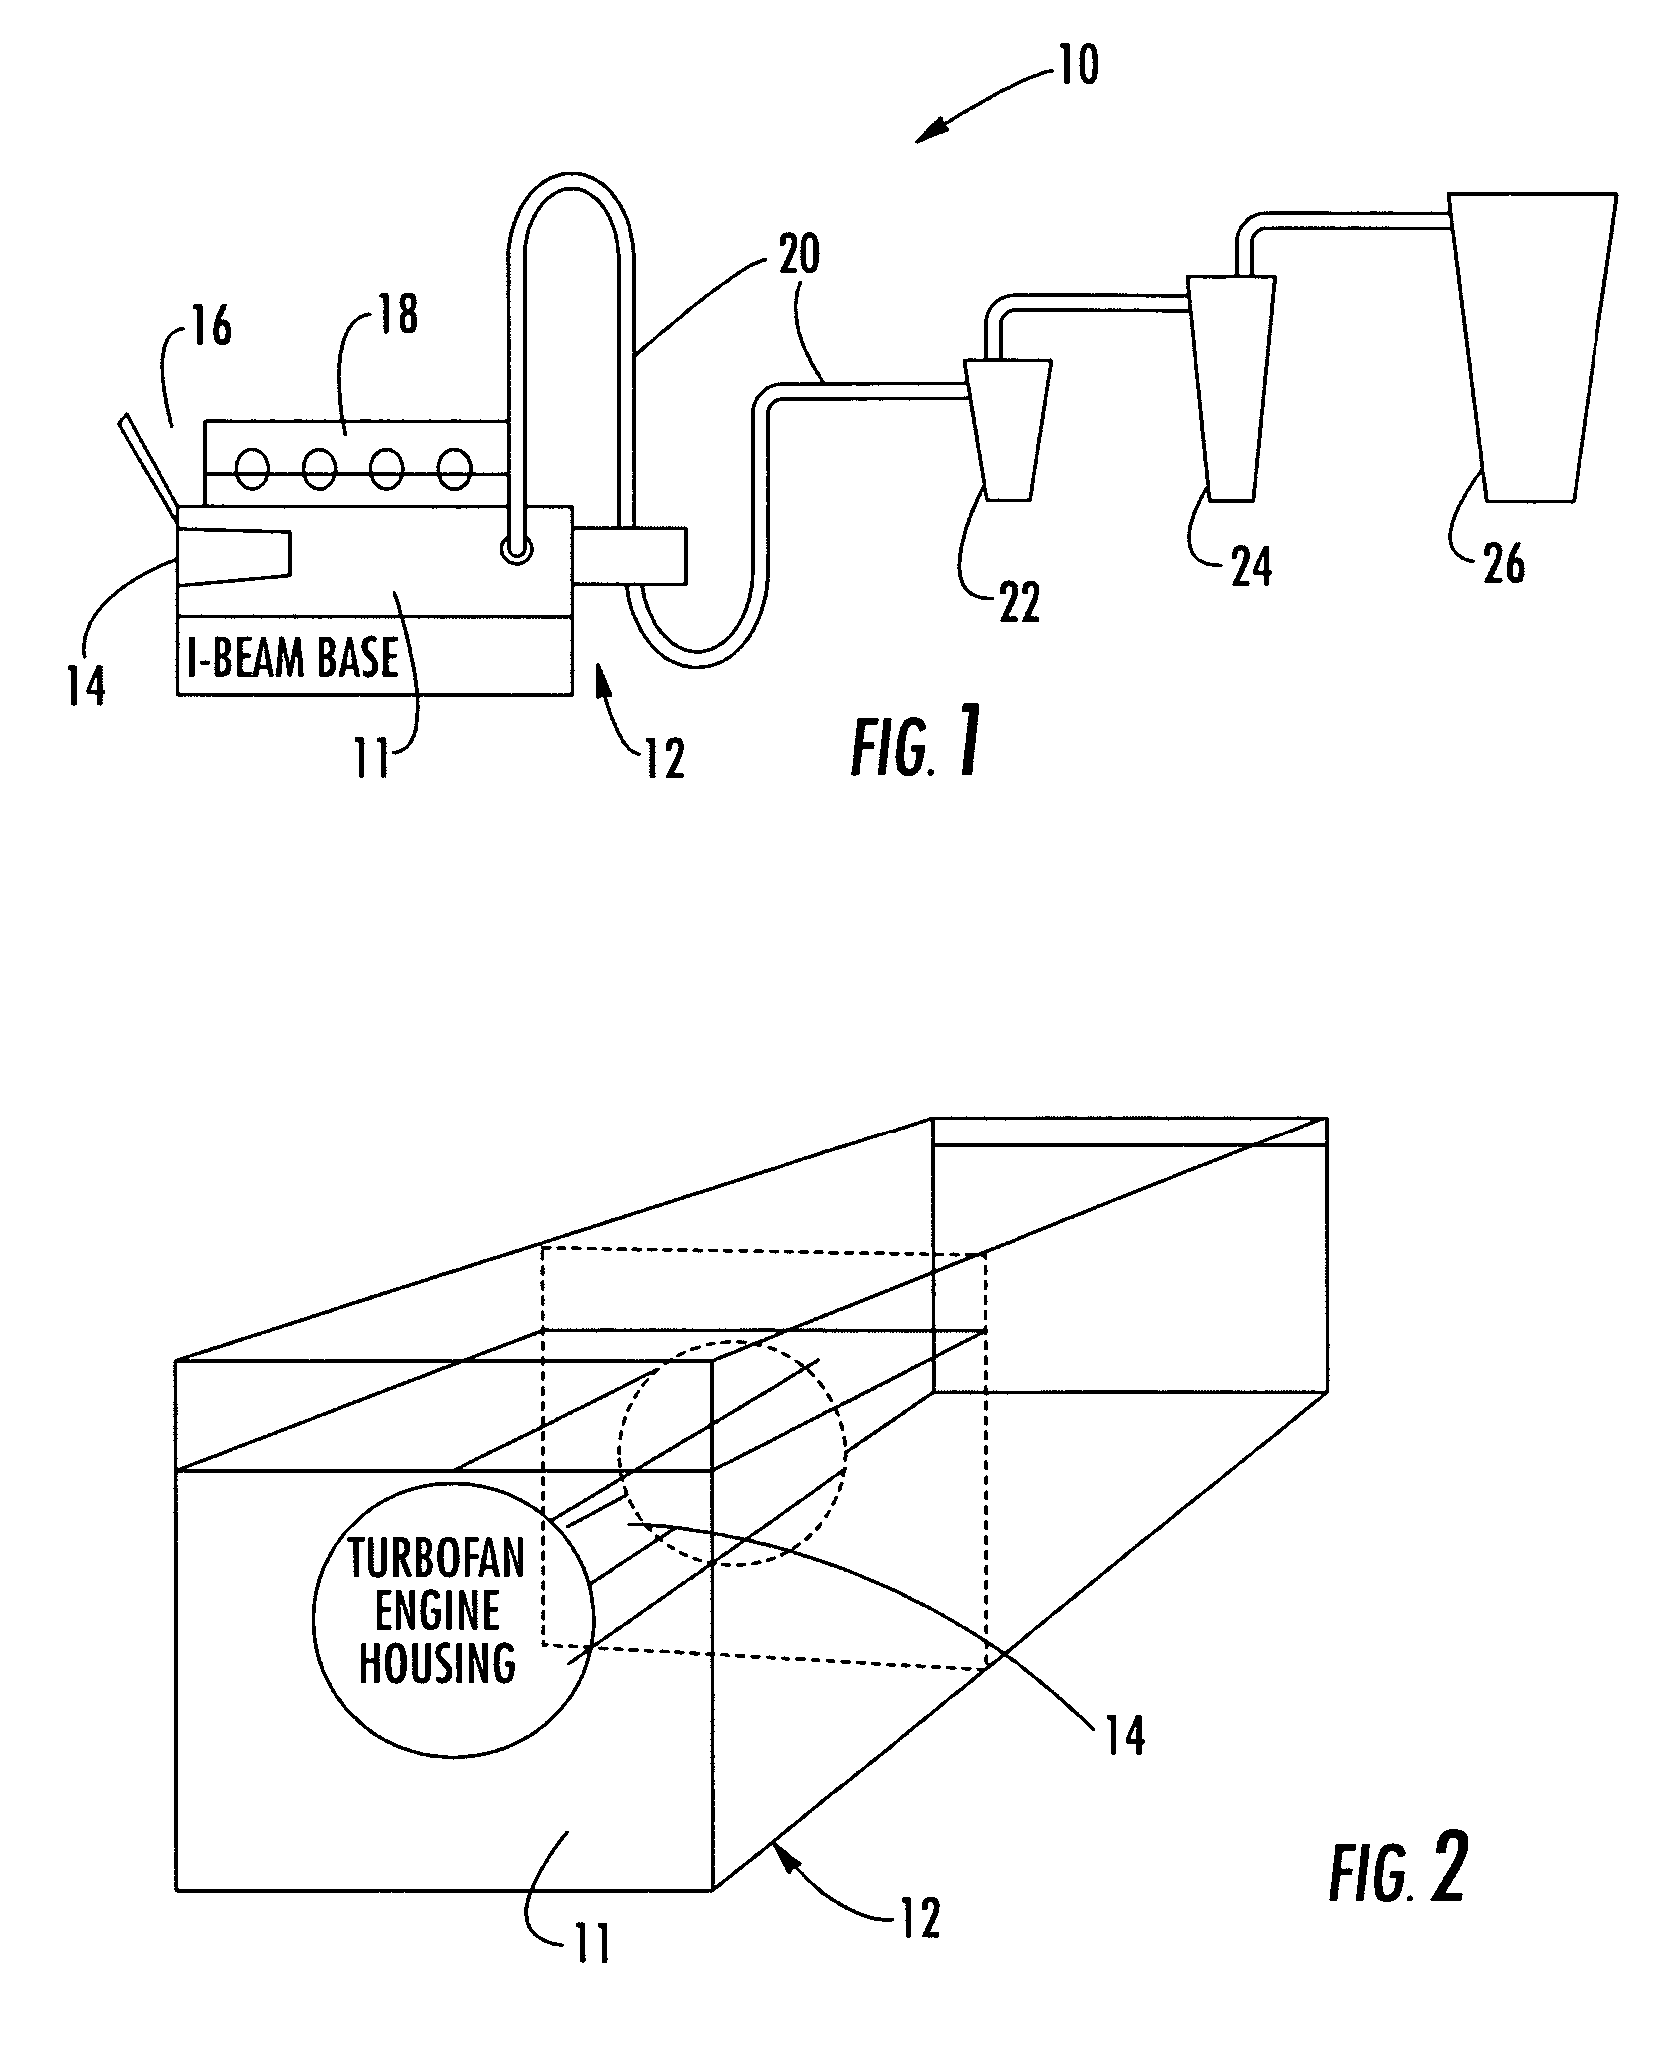 Air dryer system and method employing a jet engine